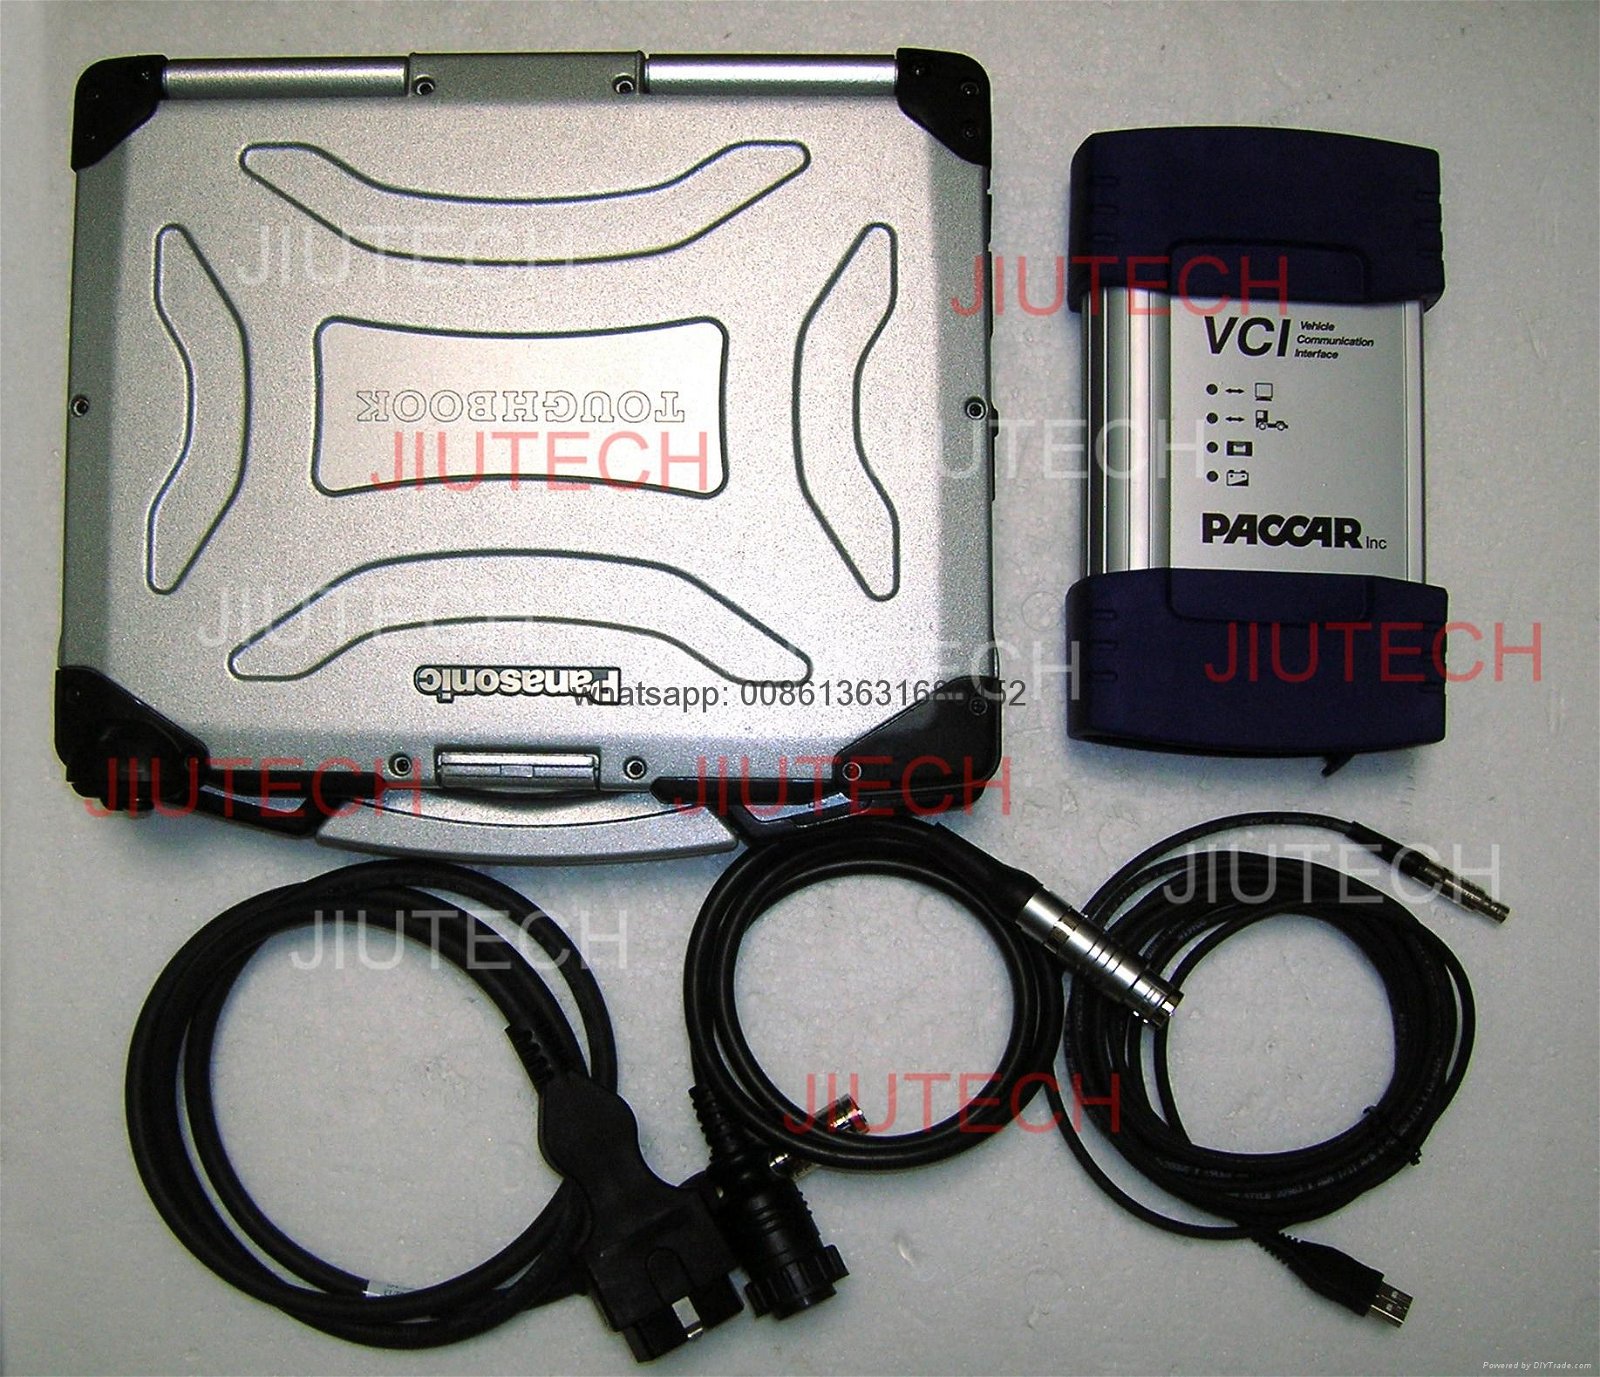 DAF VCI-560 MUX Heavy Duty Truck Diagnostic Scanner With Cf 30 Laptop